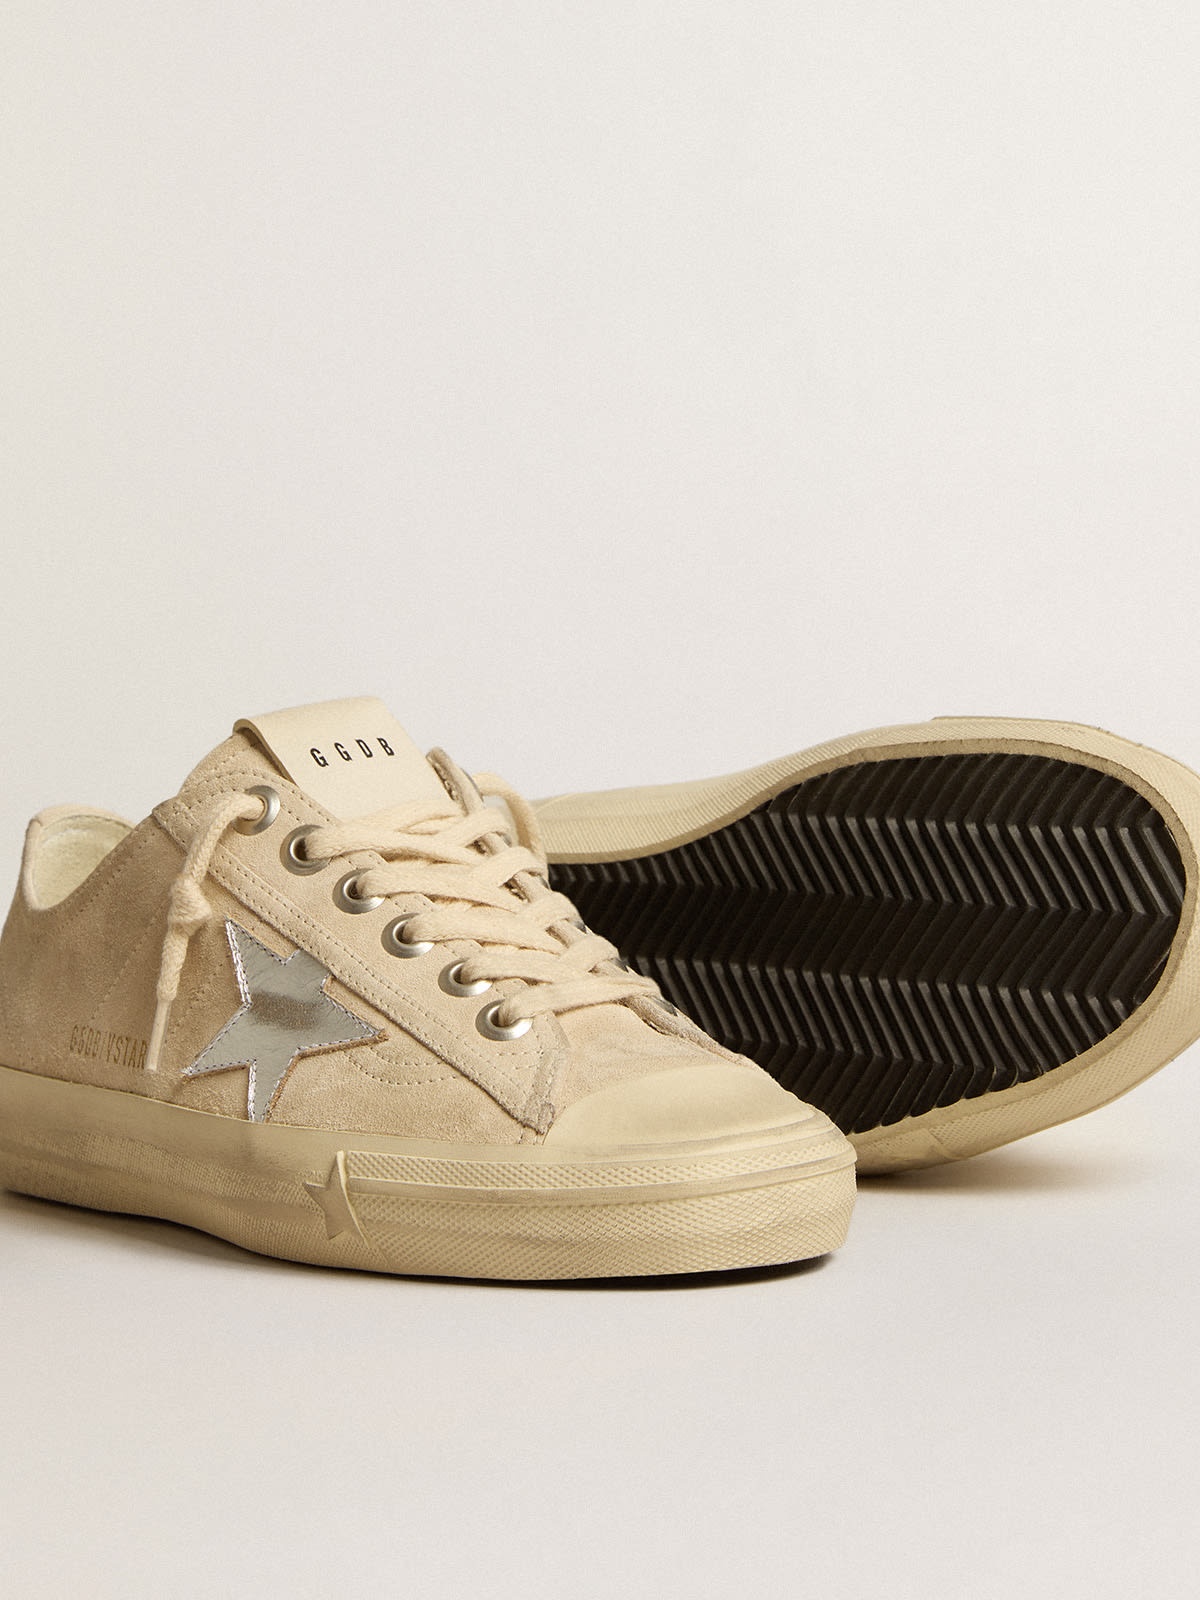 Women’s V-Star in pearl suede with silver metallic leather star - 3